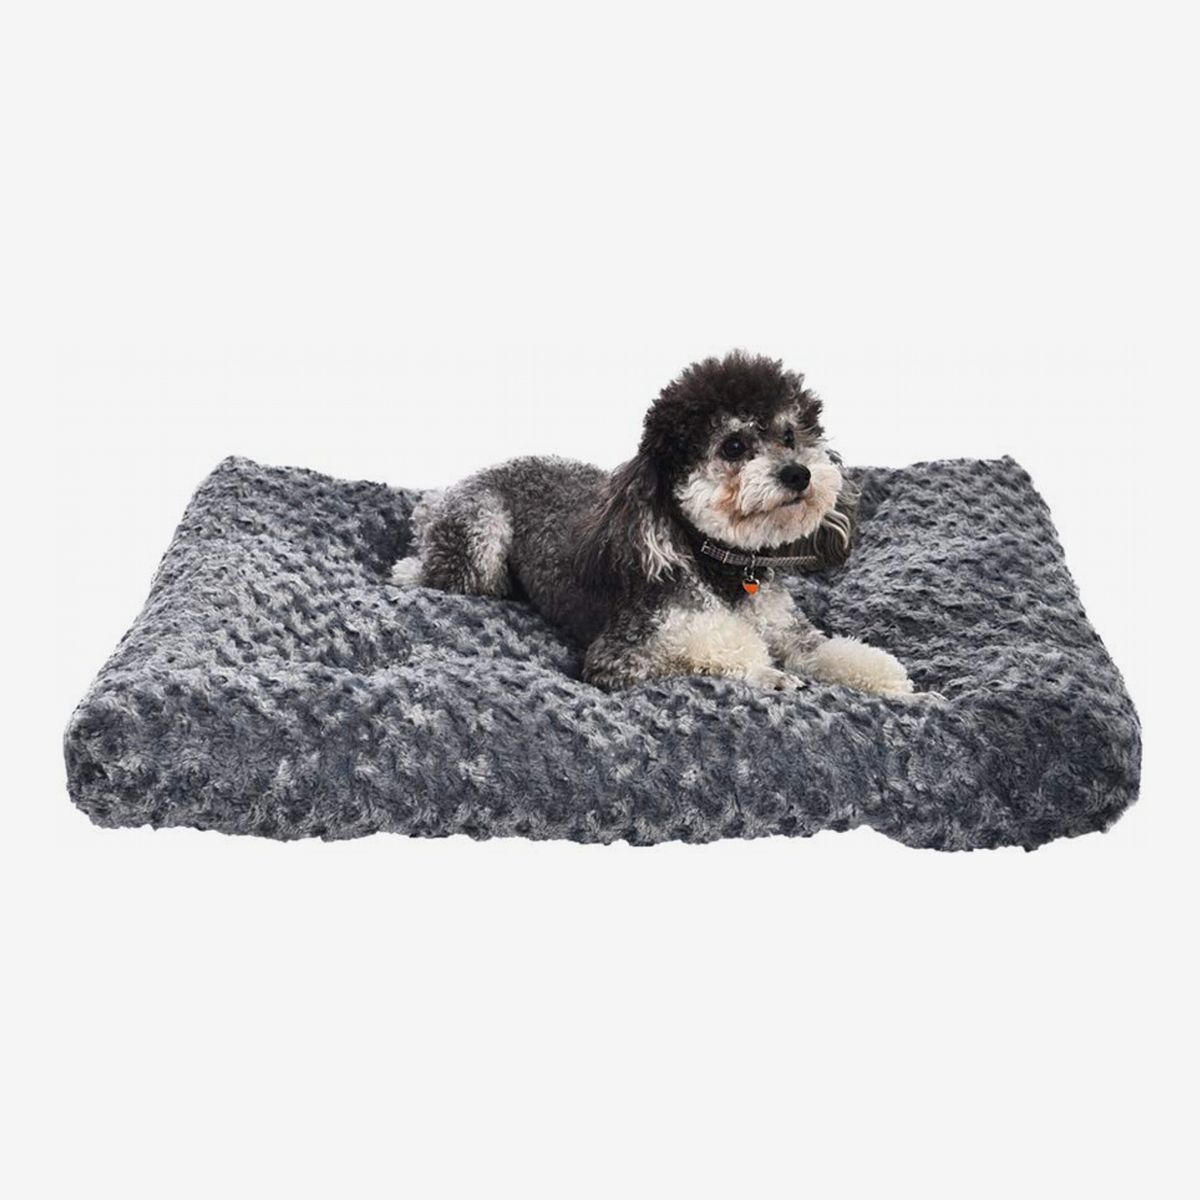 inexpensive dog bed